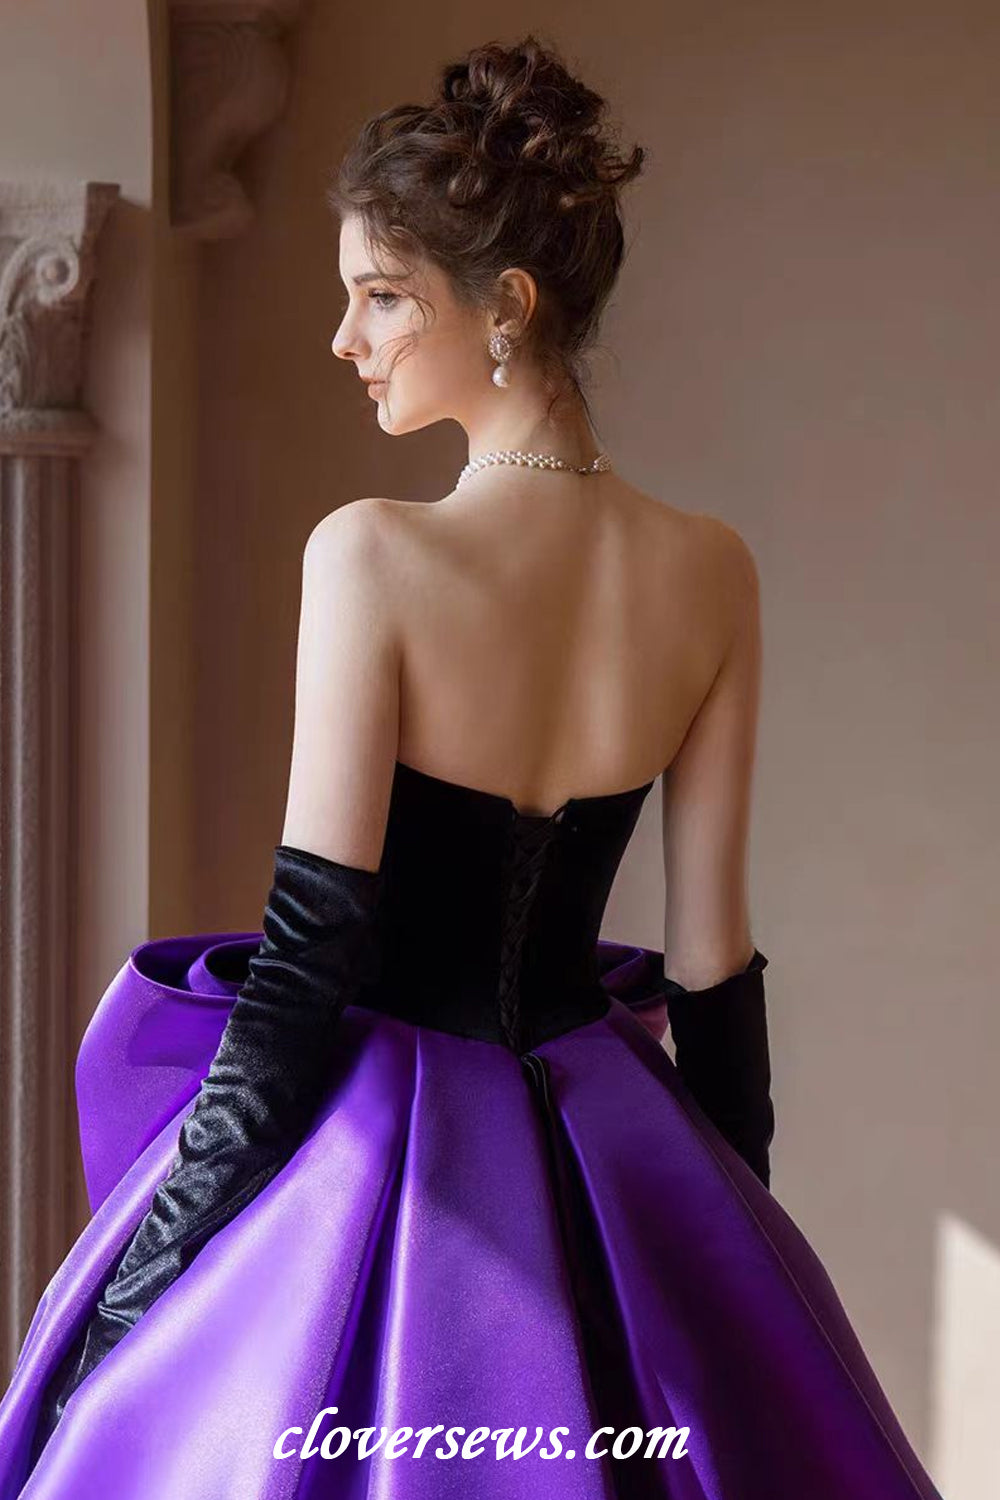 Black Velvet Top Purple Satin With Bowknot Ball Gown Prom Gown With Long Gloves, CP1142